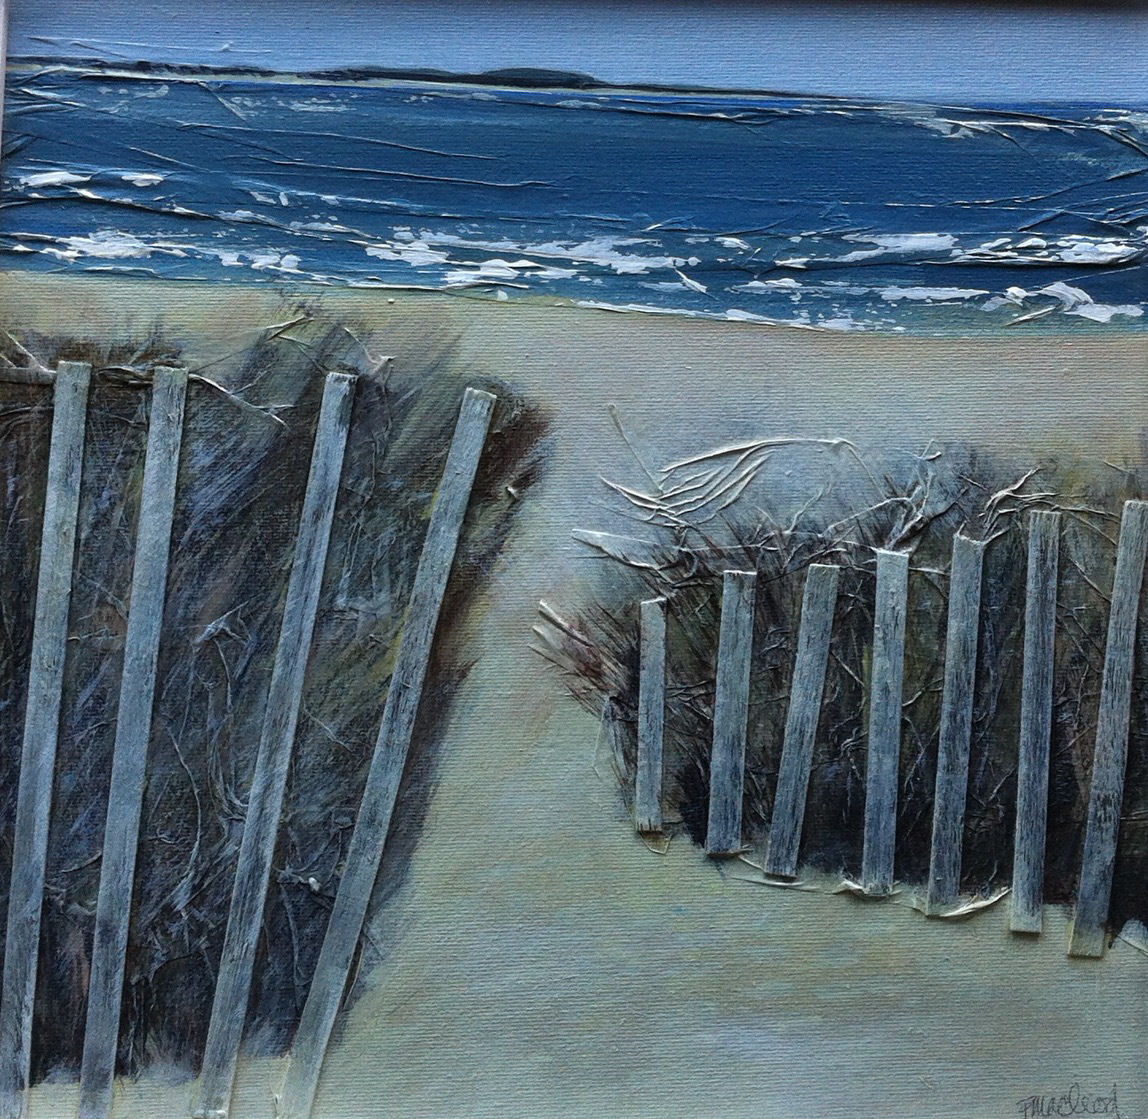 'June Fence, Broughty Ferry' by artist Fiona MacLeod